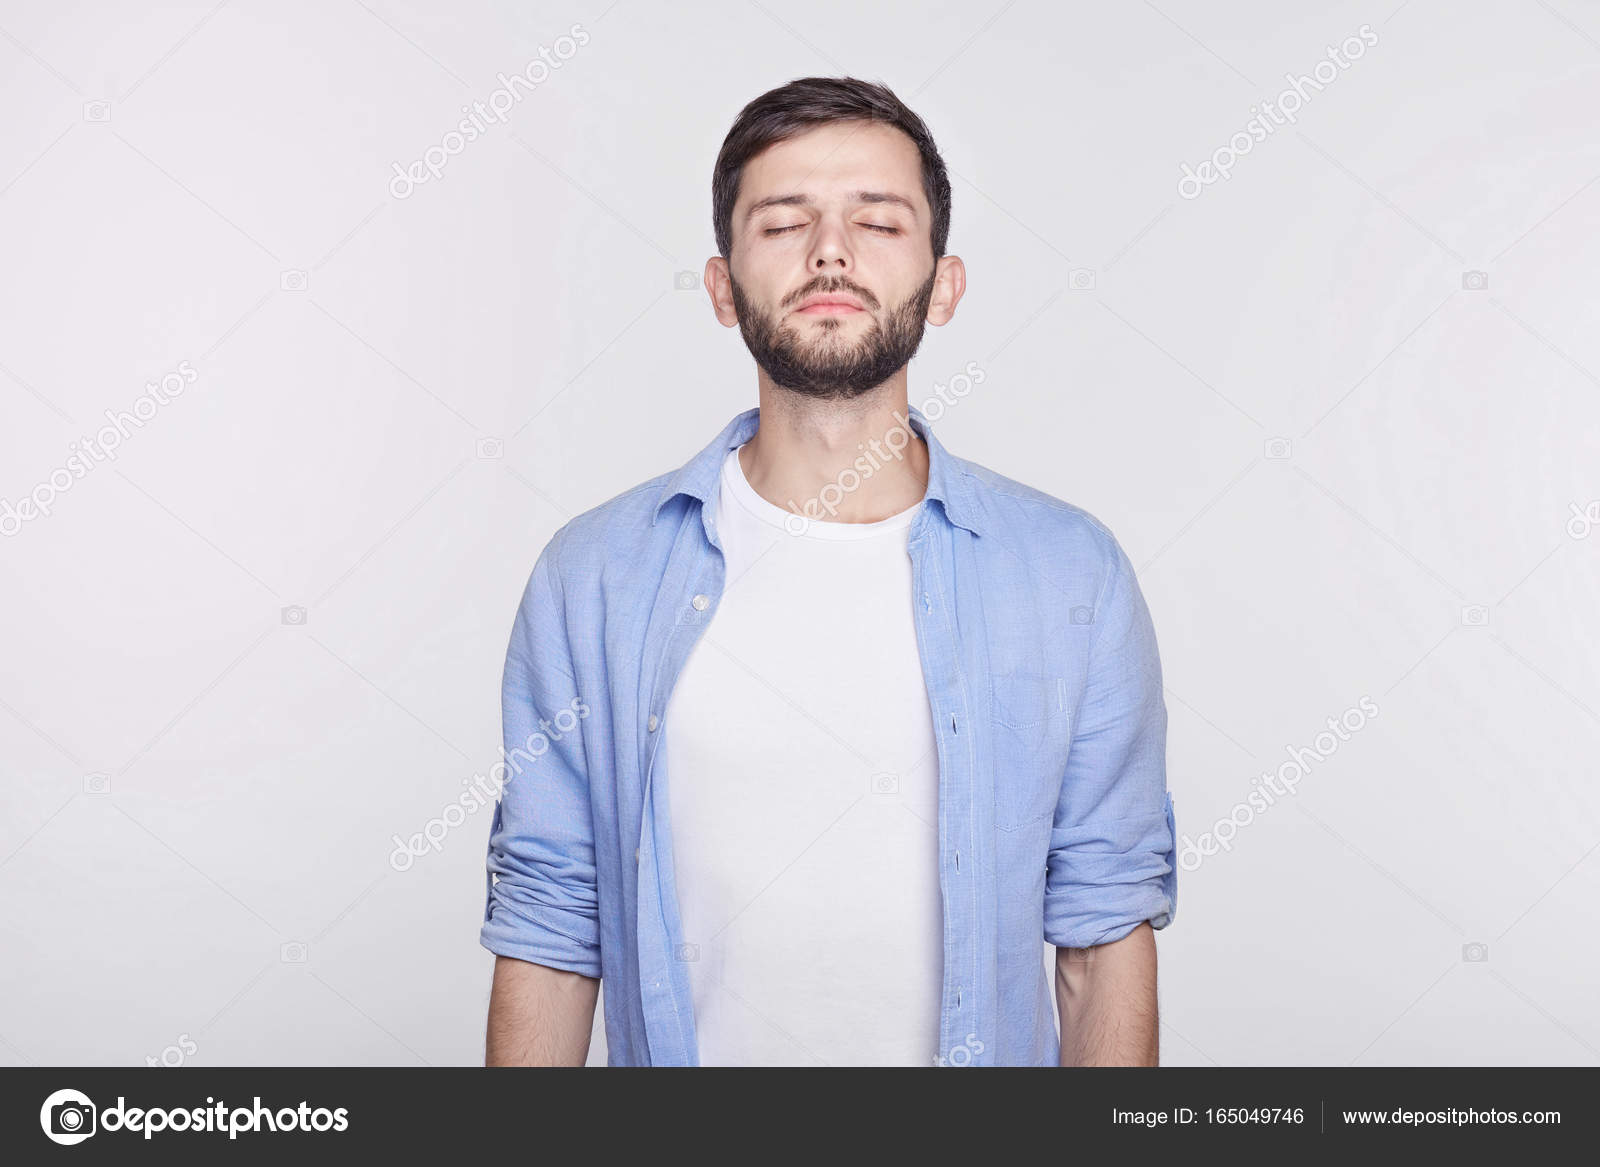 depositphotos 165049746 stock photo people and work exhausted and